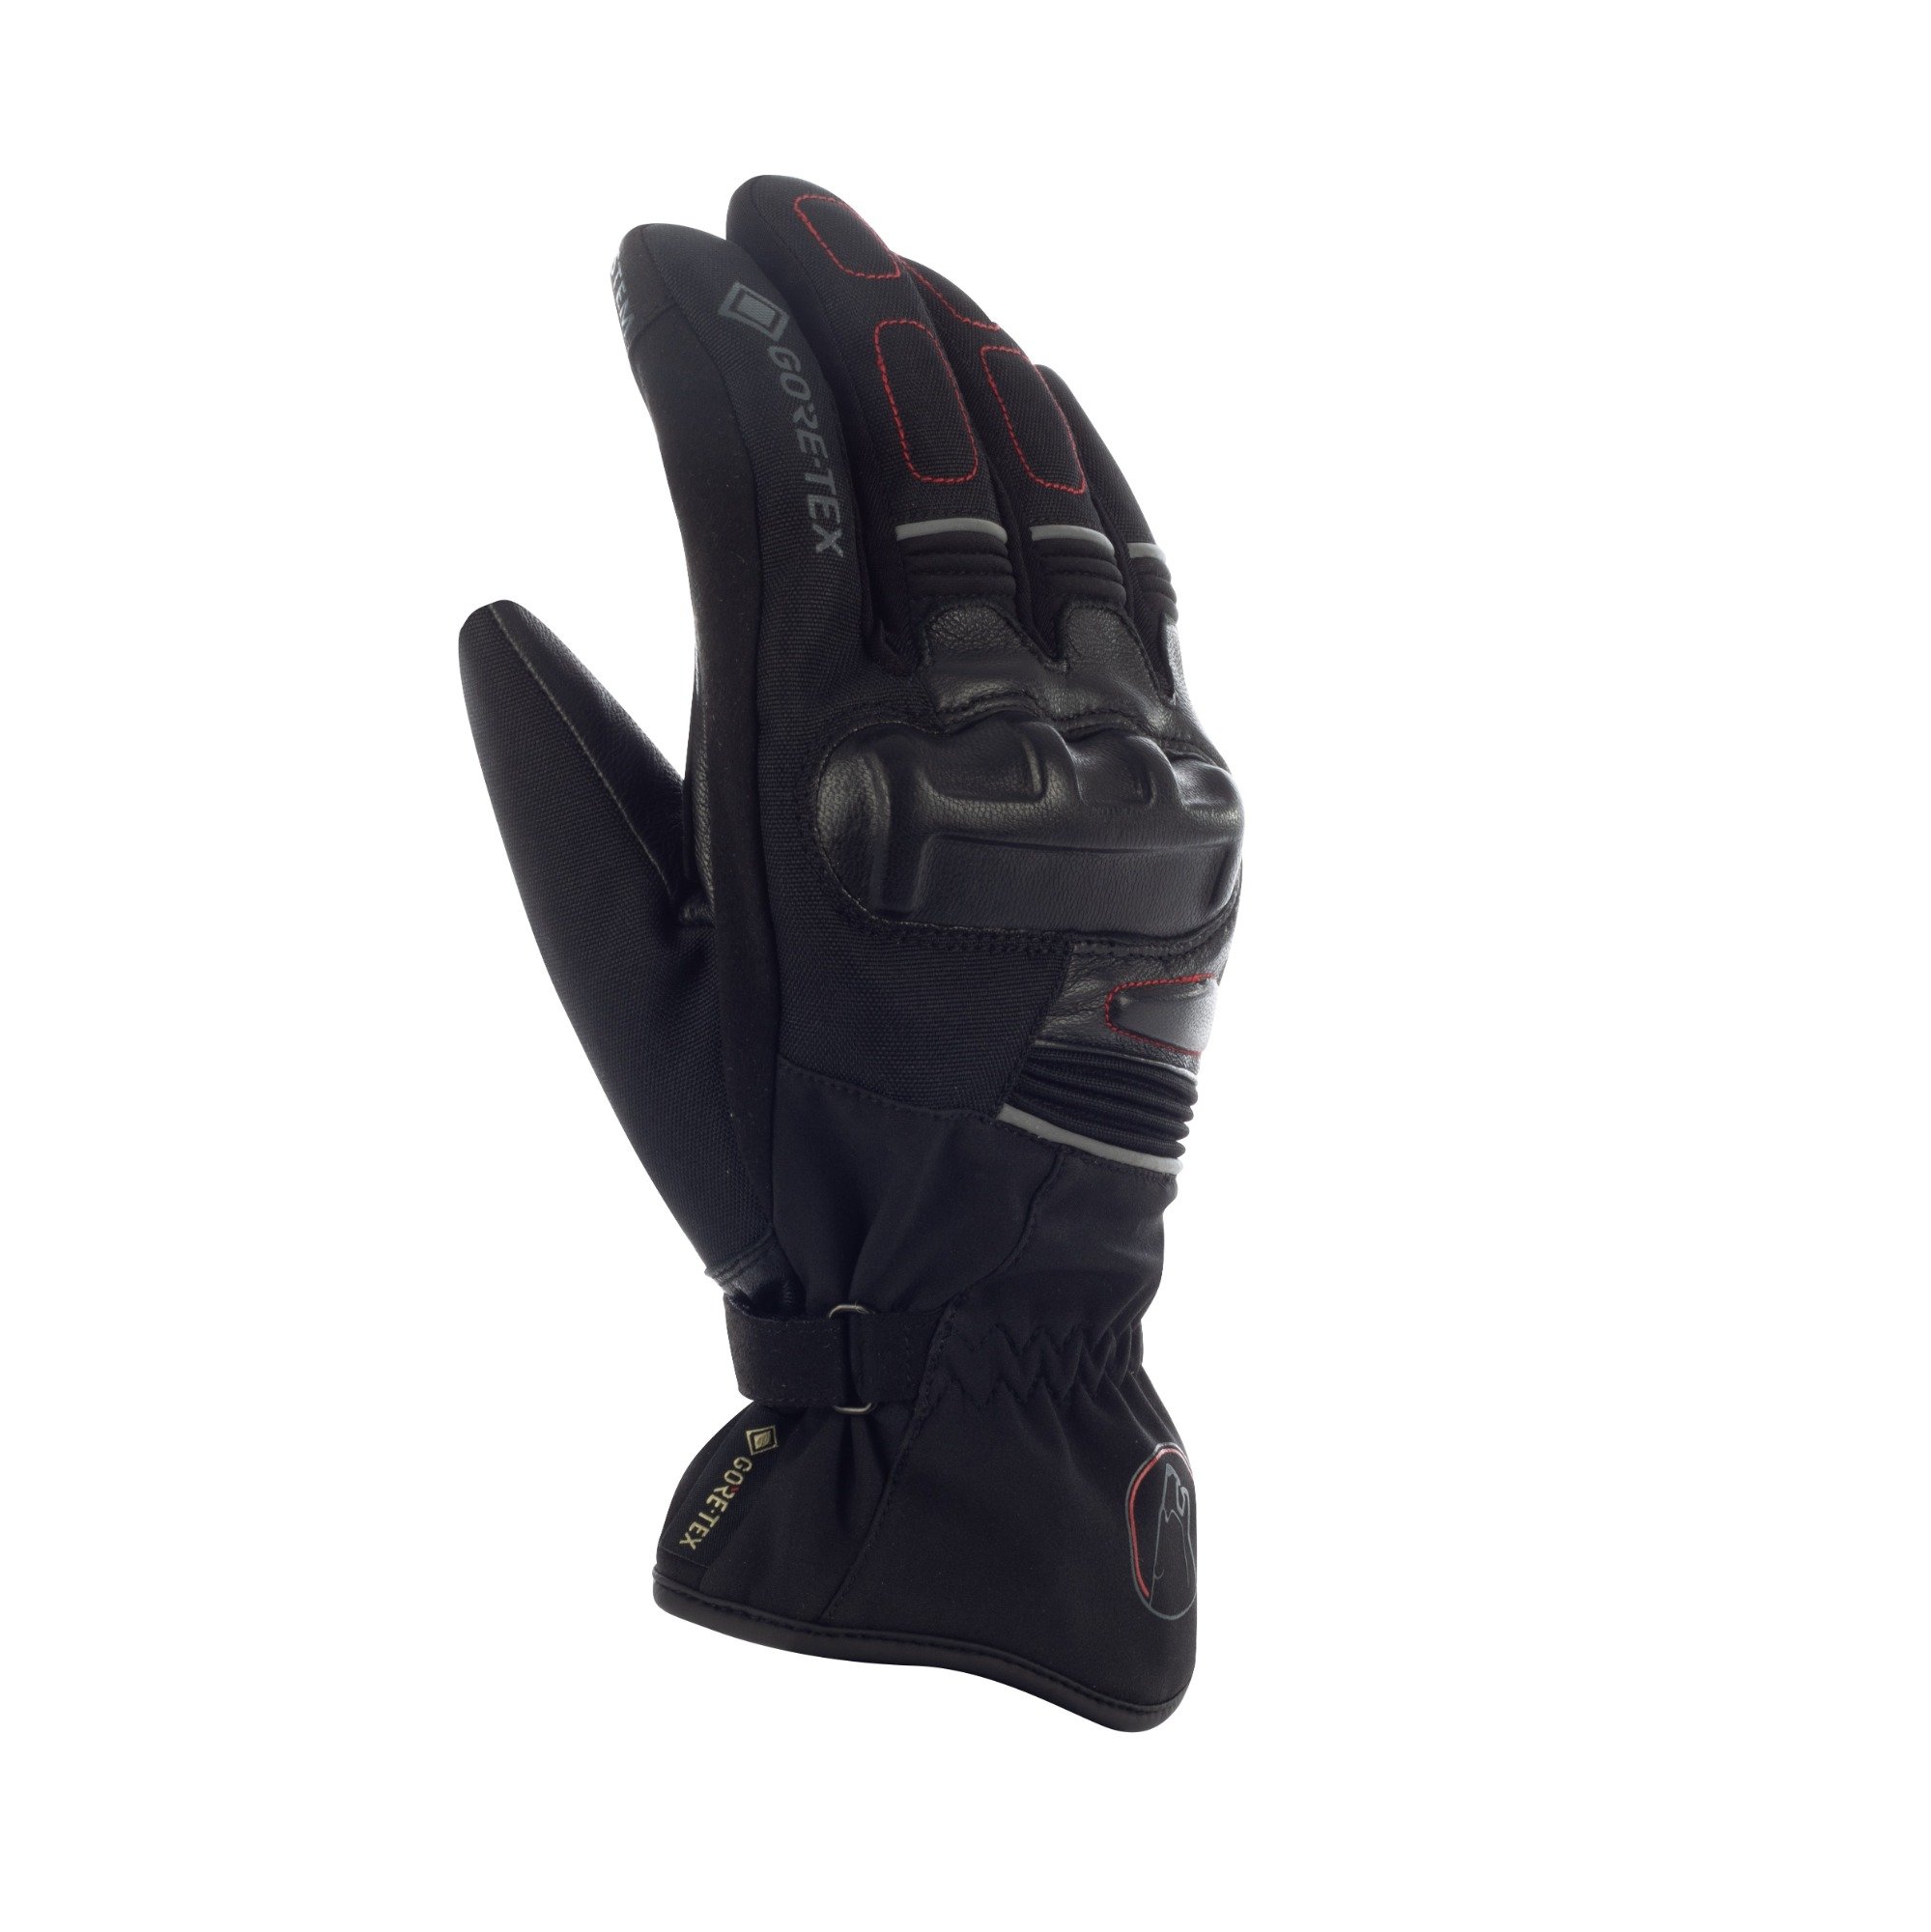 Image of Bering Punch GTX Gloves Black Size T13 ID 3660815172094